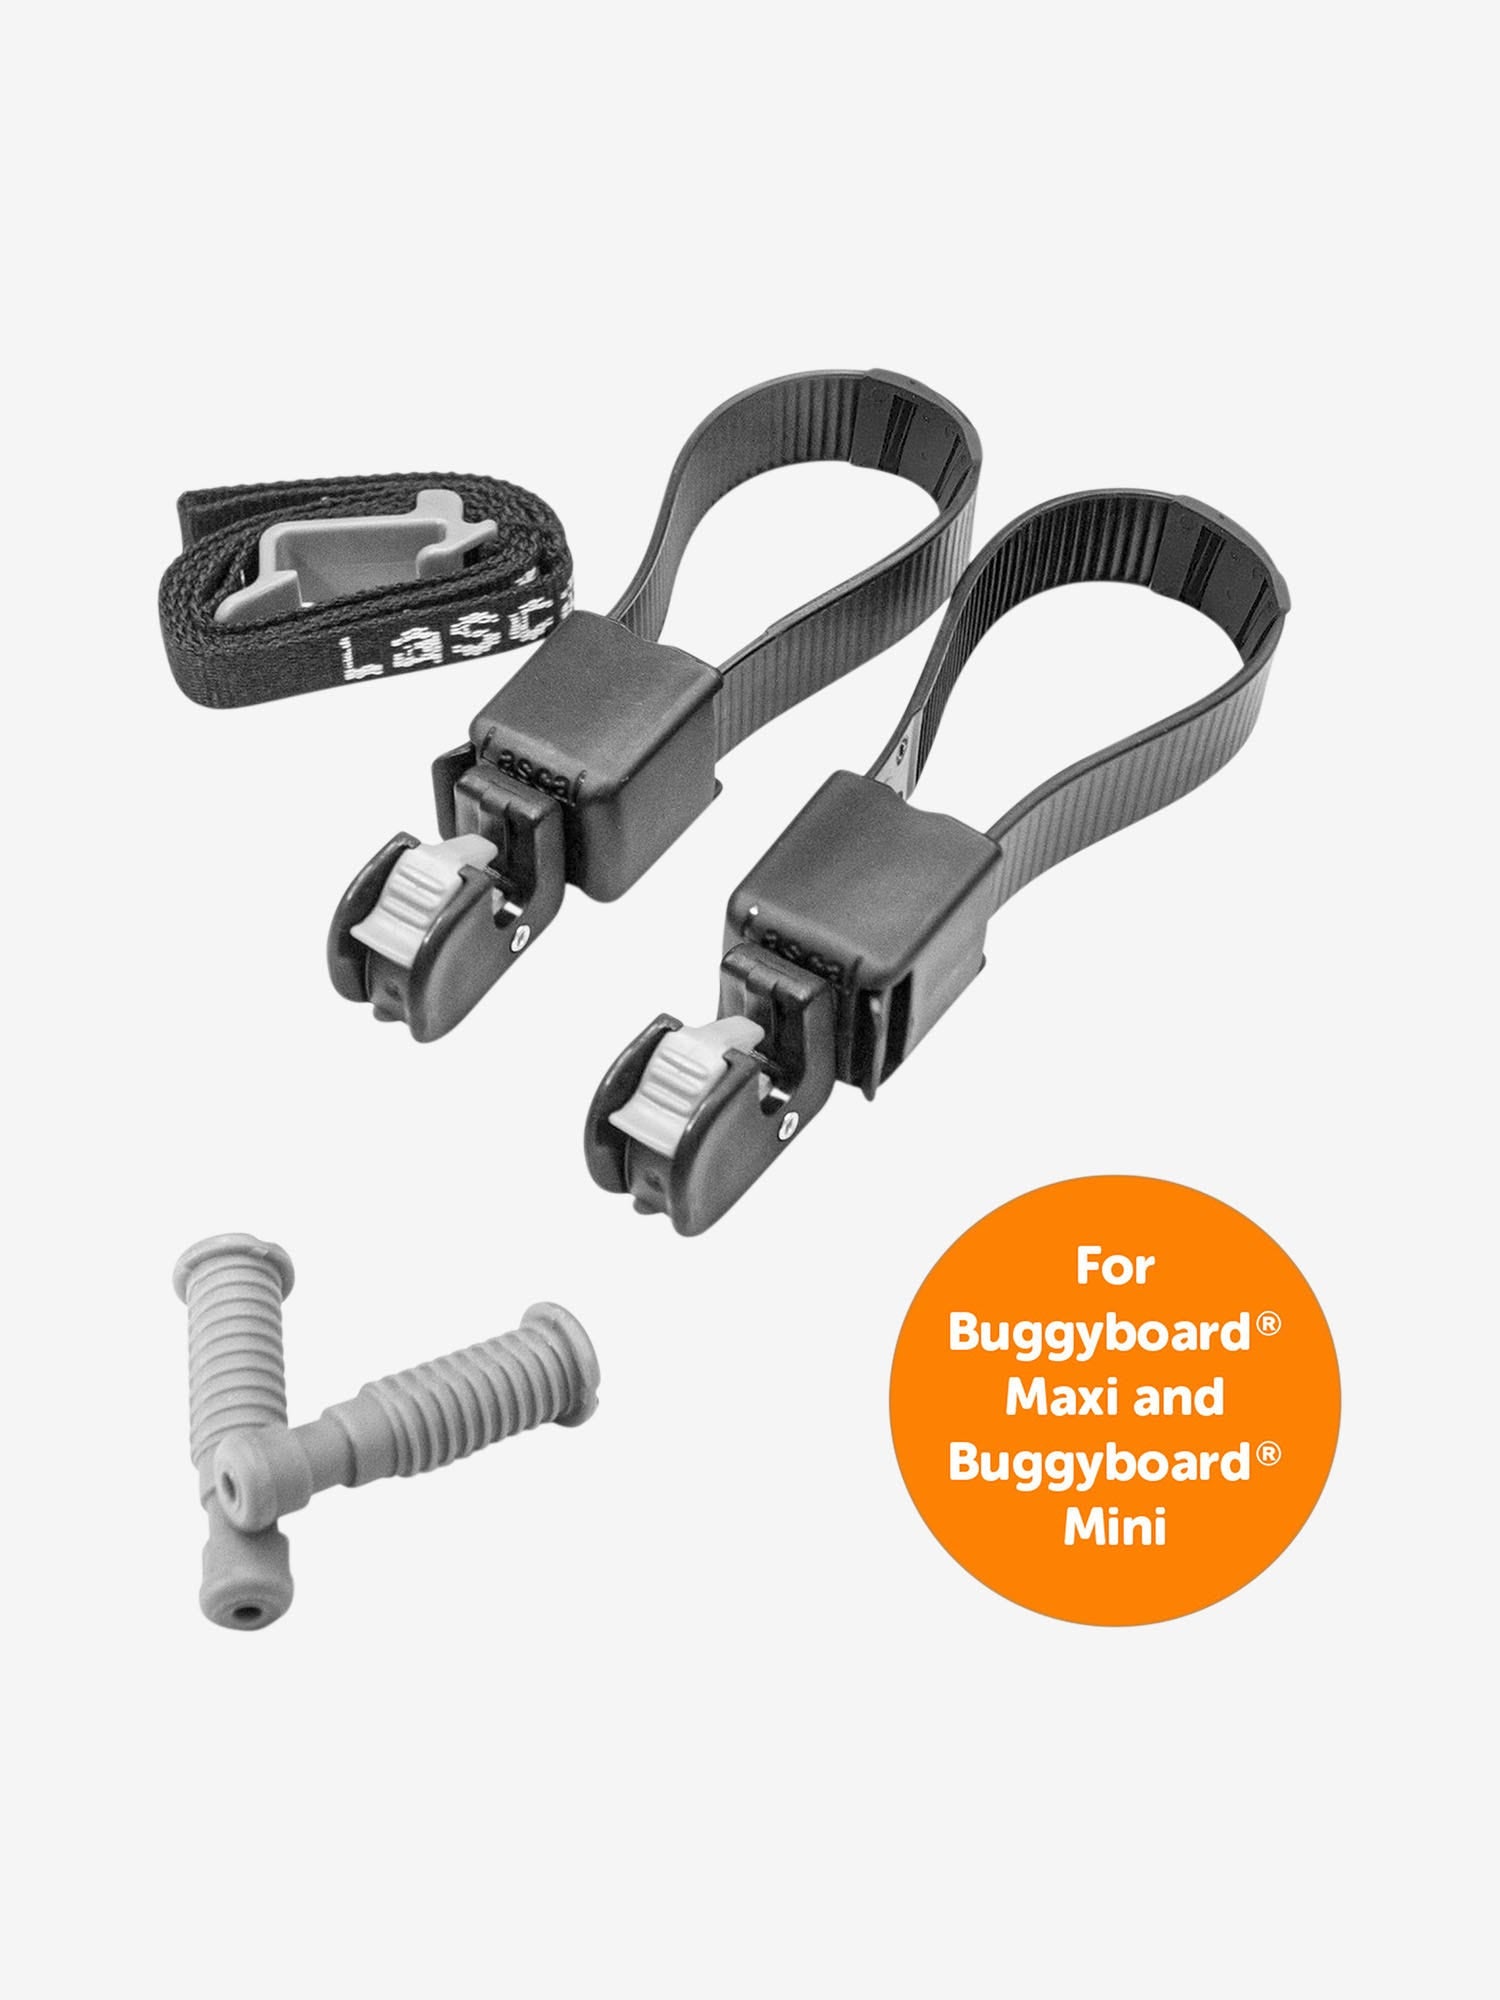 Lascal Buggy Board Connector kit is now available to buy from all Tony  Kealys stores nationwide